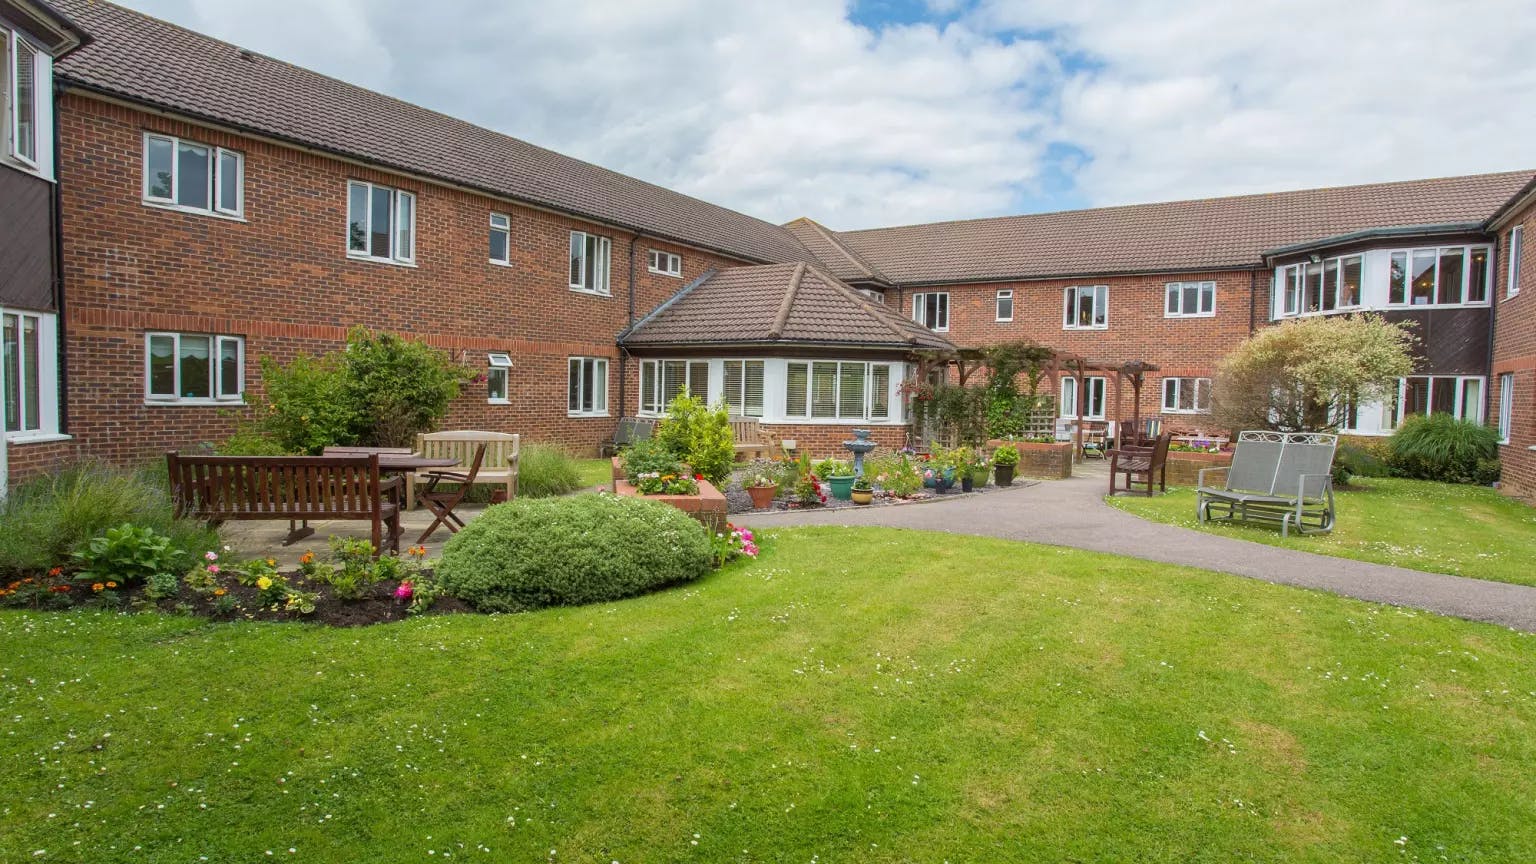 Exterior of The Mead care home in Borehamwood, Hertfordshire